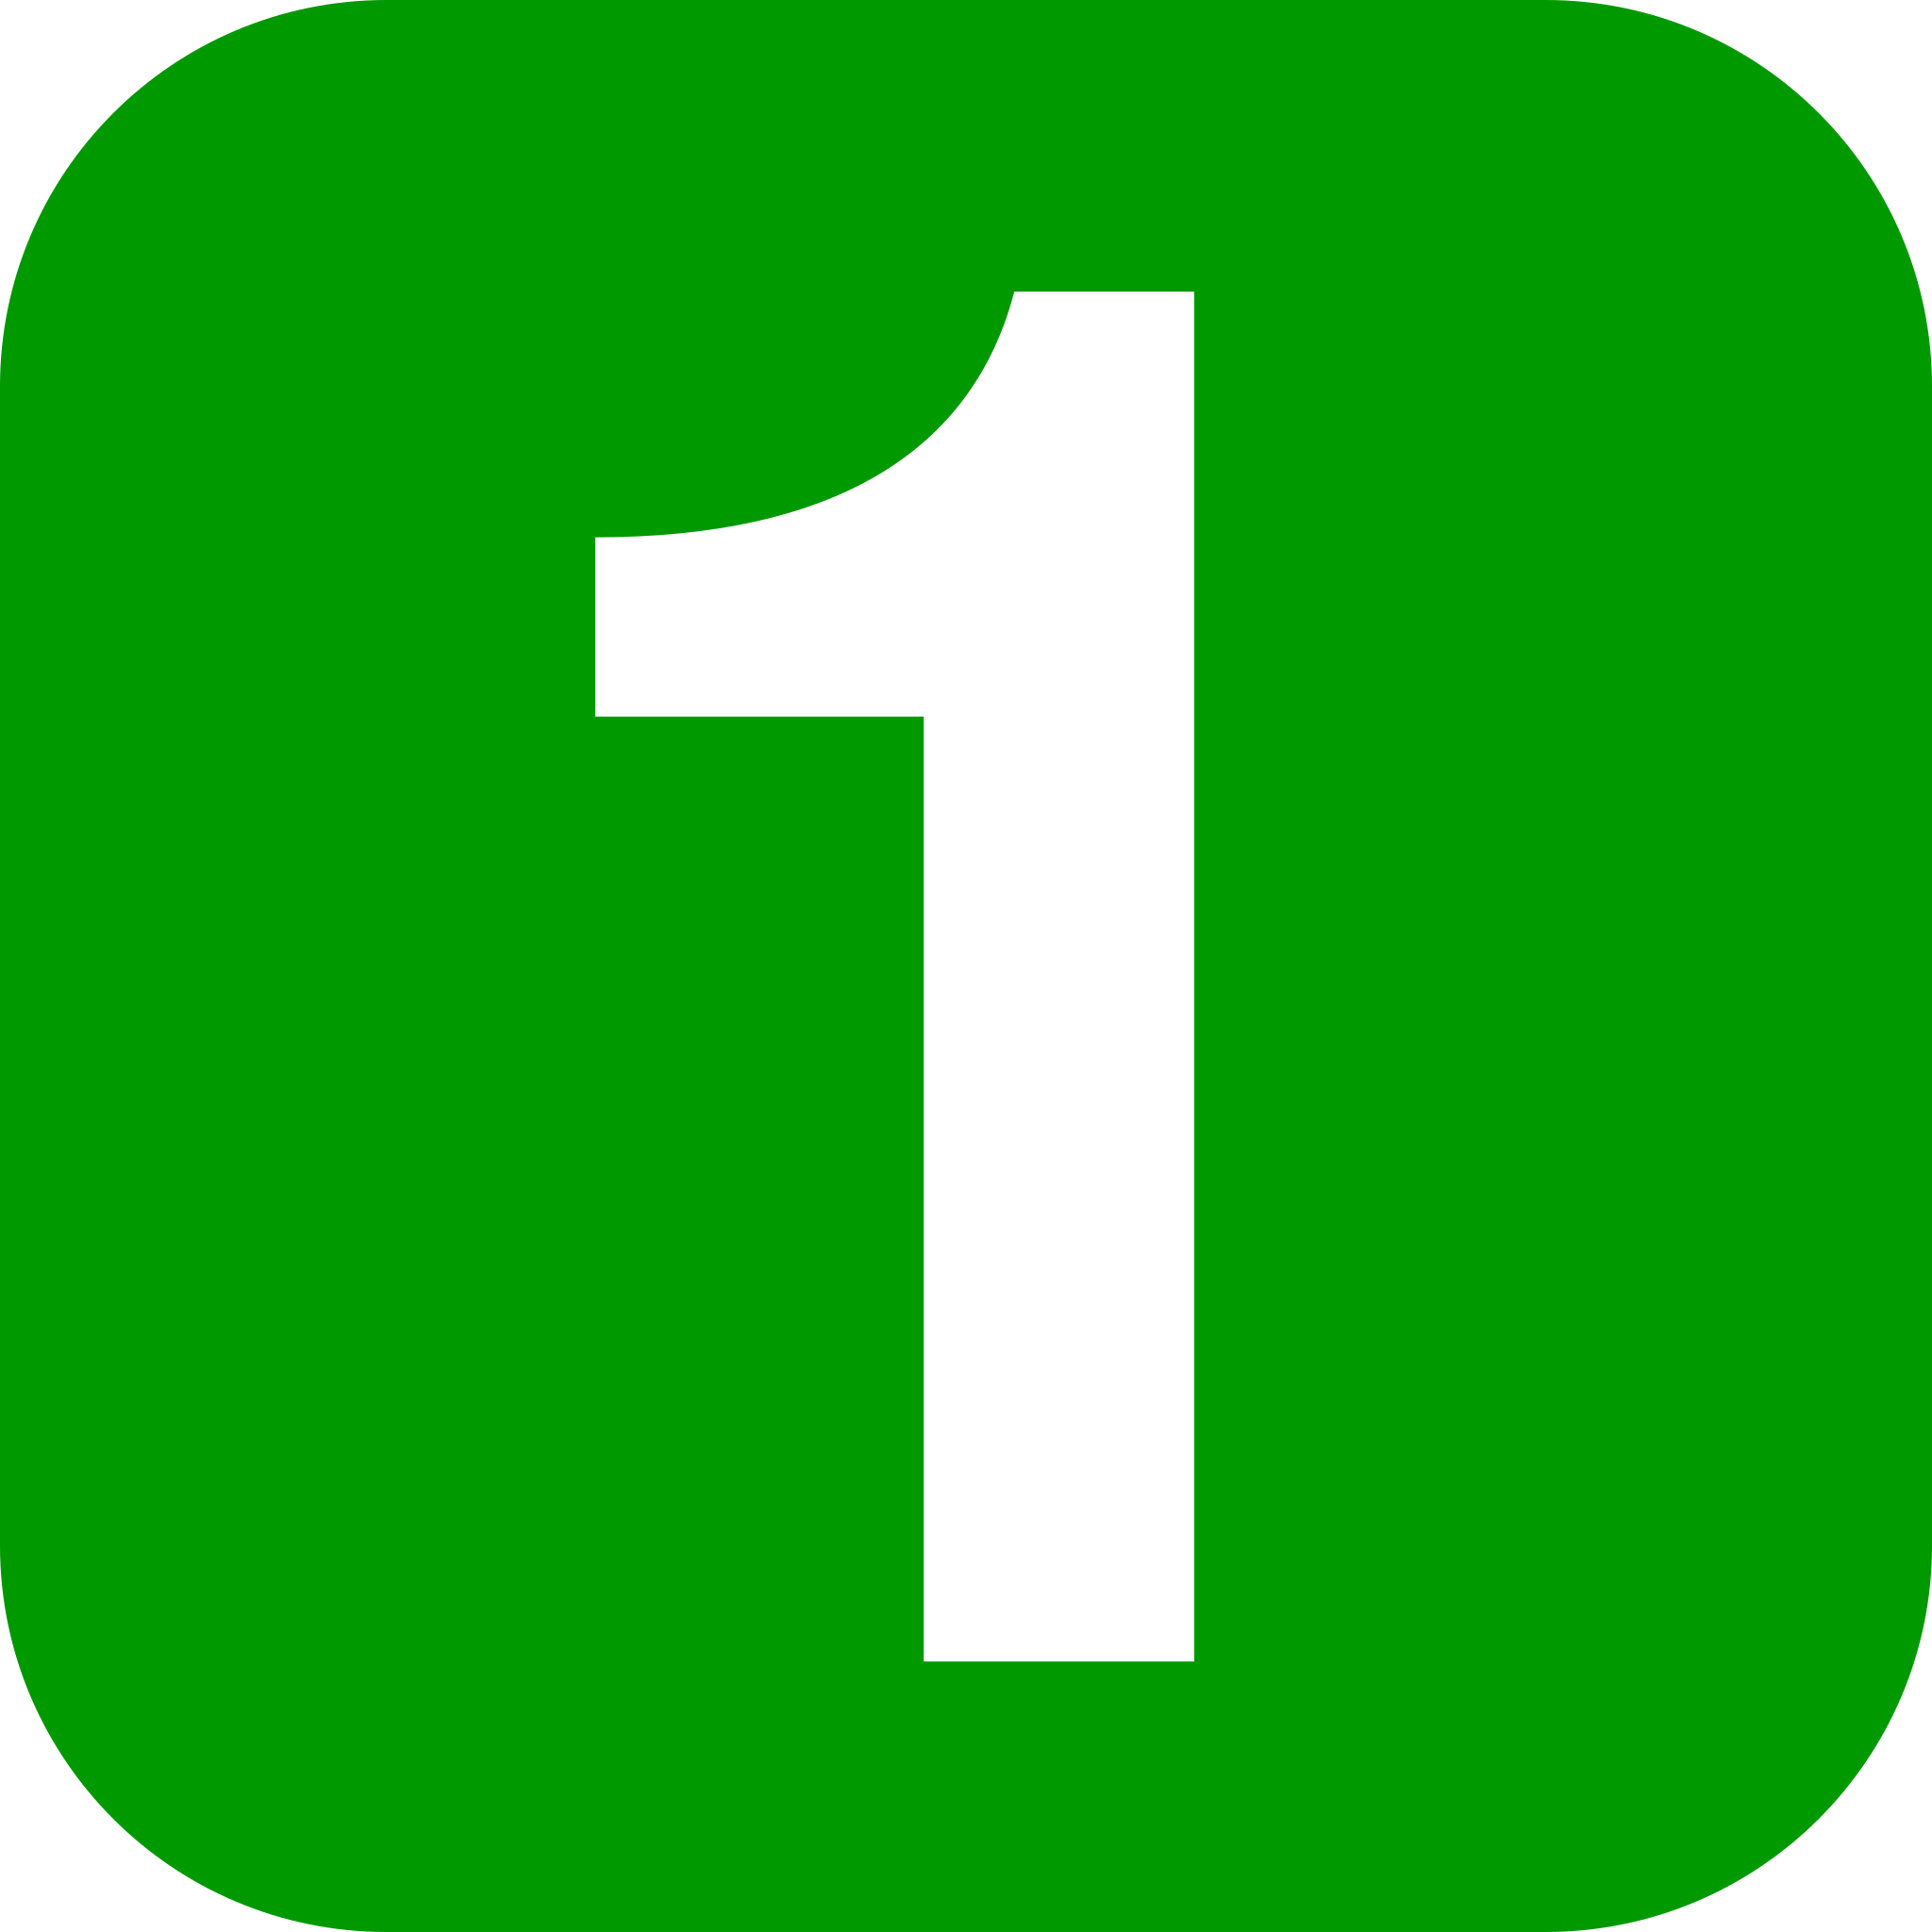 File:Number 1 in green rounded square.svg - Wikipedia